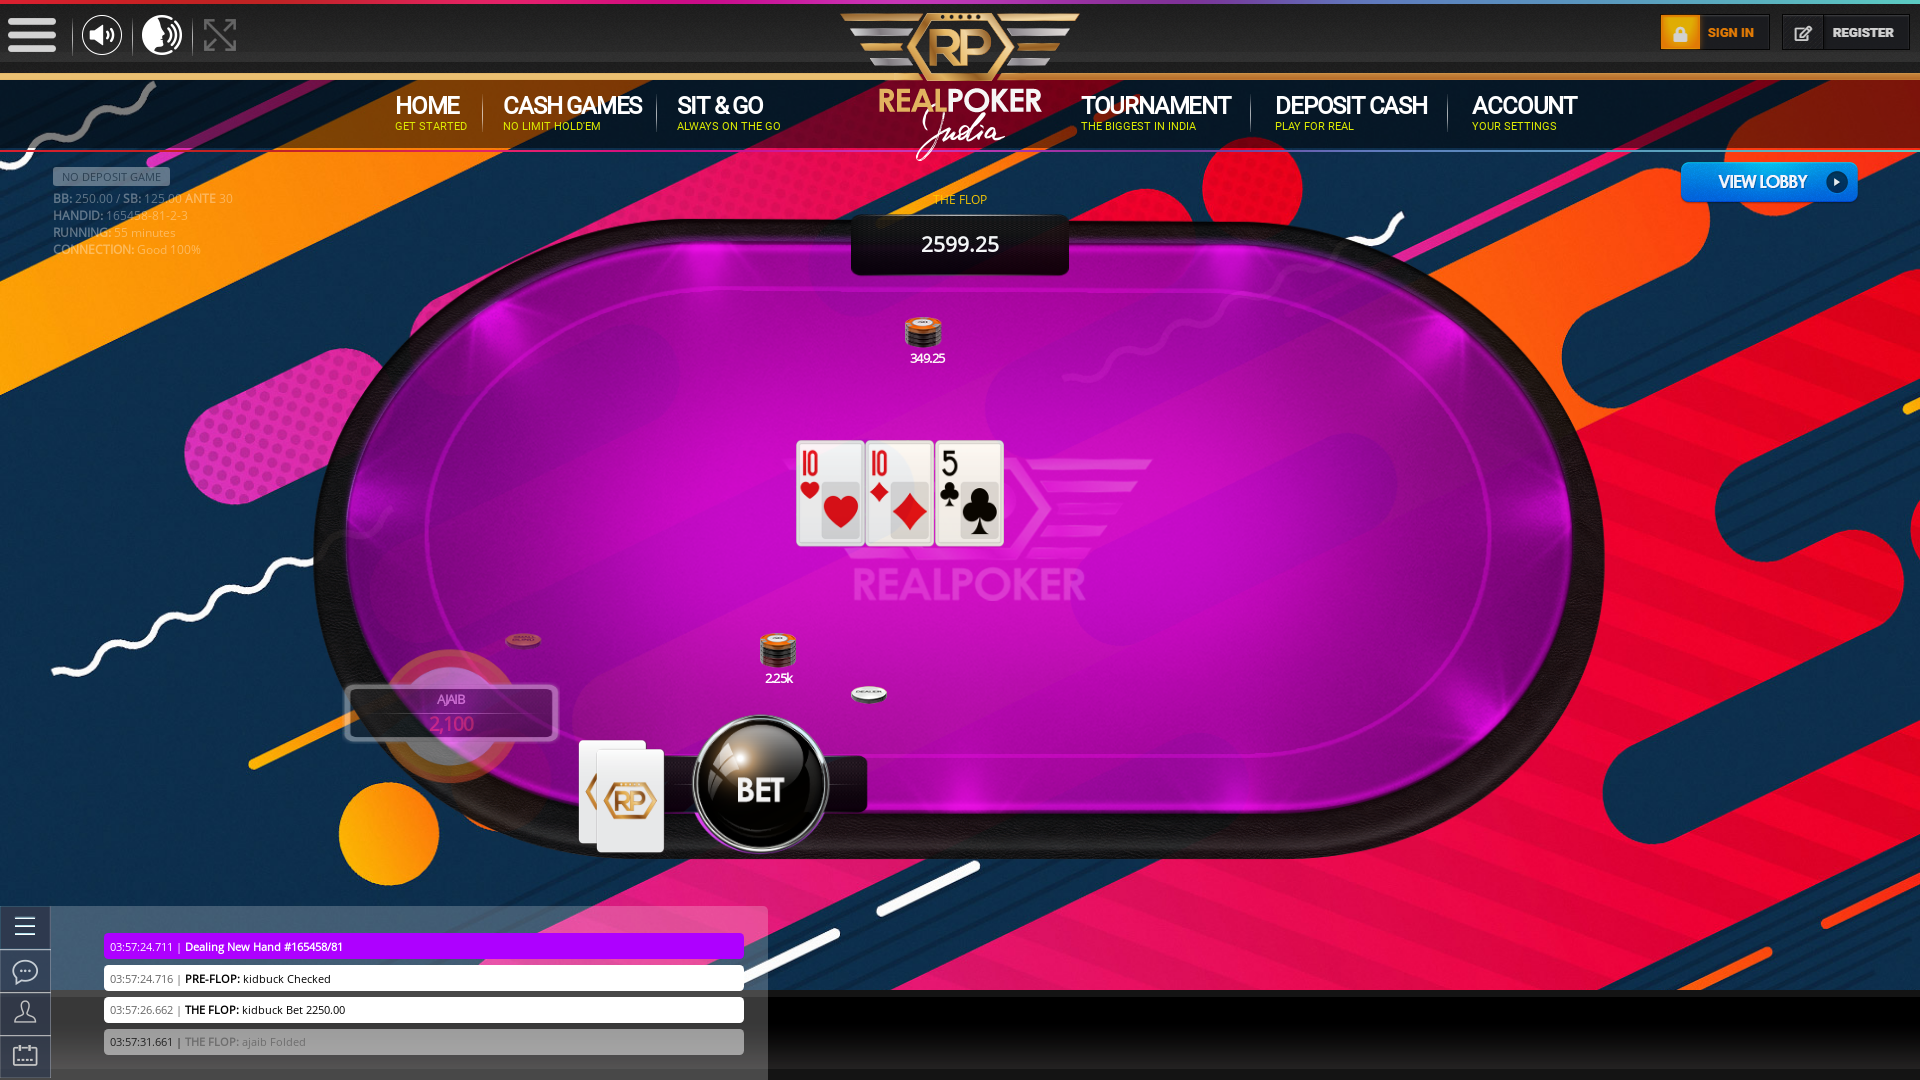 Indian poker on a 10 player table in the 54th minute